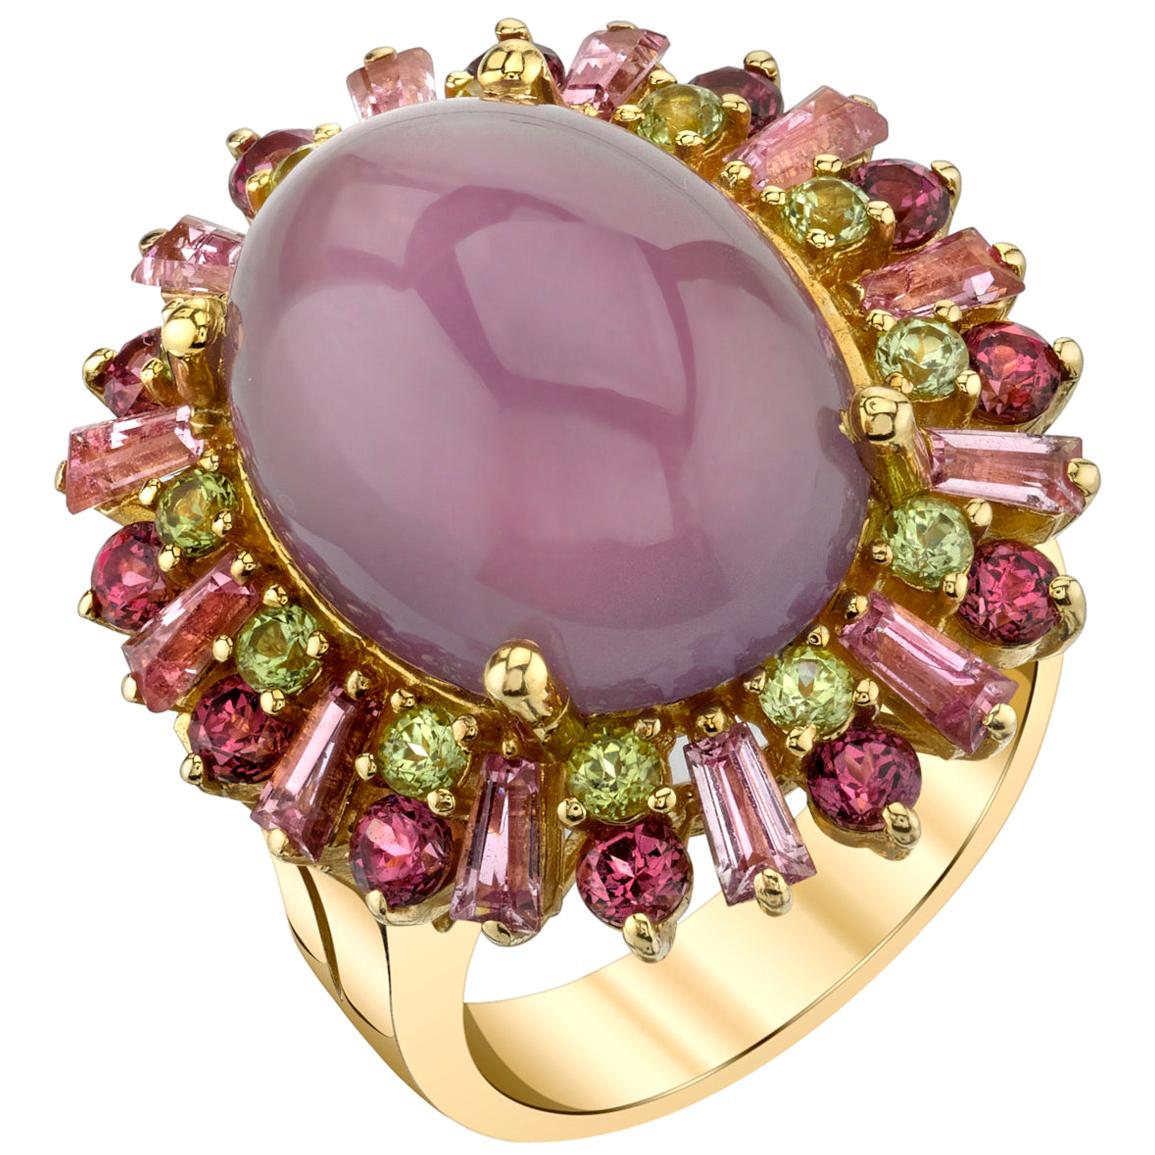 Lavender Chalcedony, Pink Tourmaline, Rhodolite Garnet and Peridot Cocktail Ring